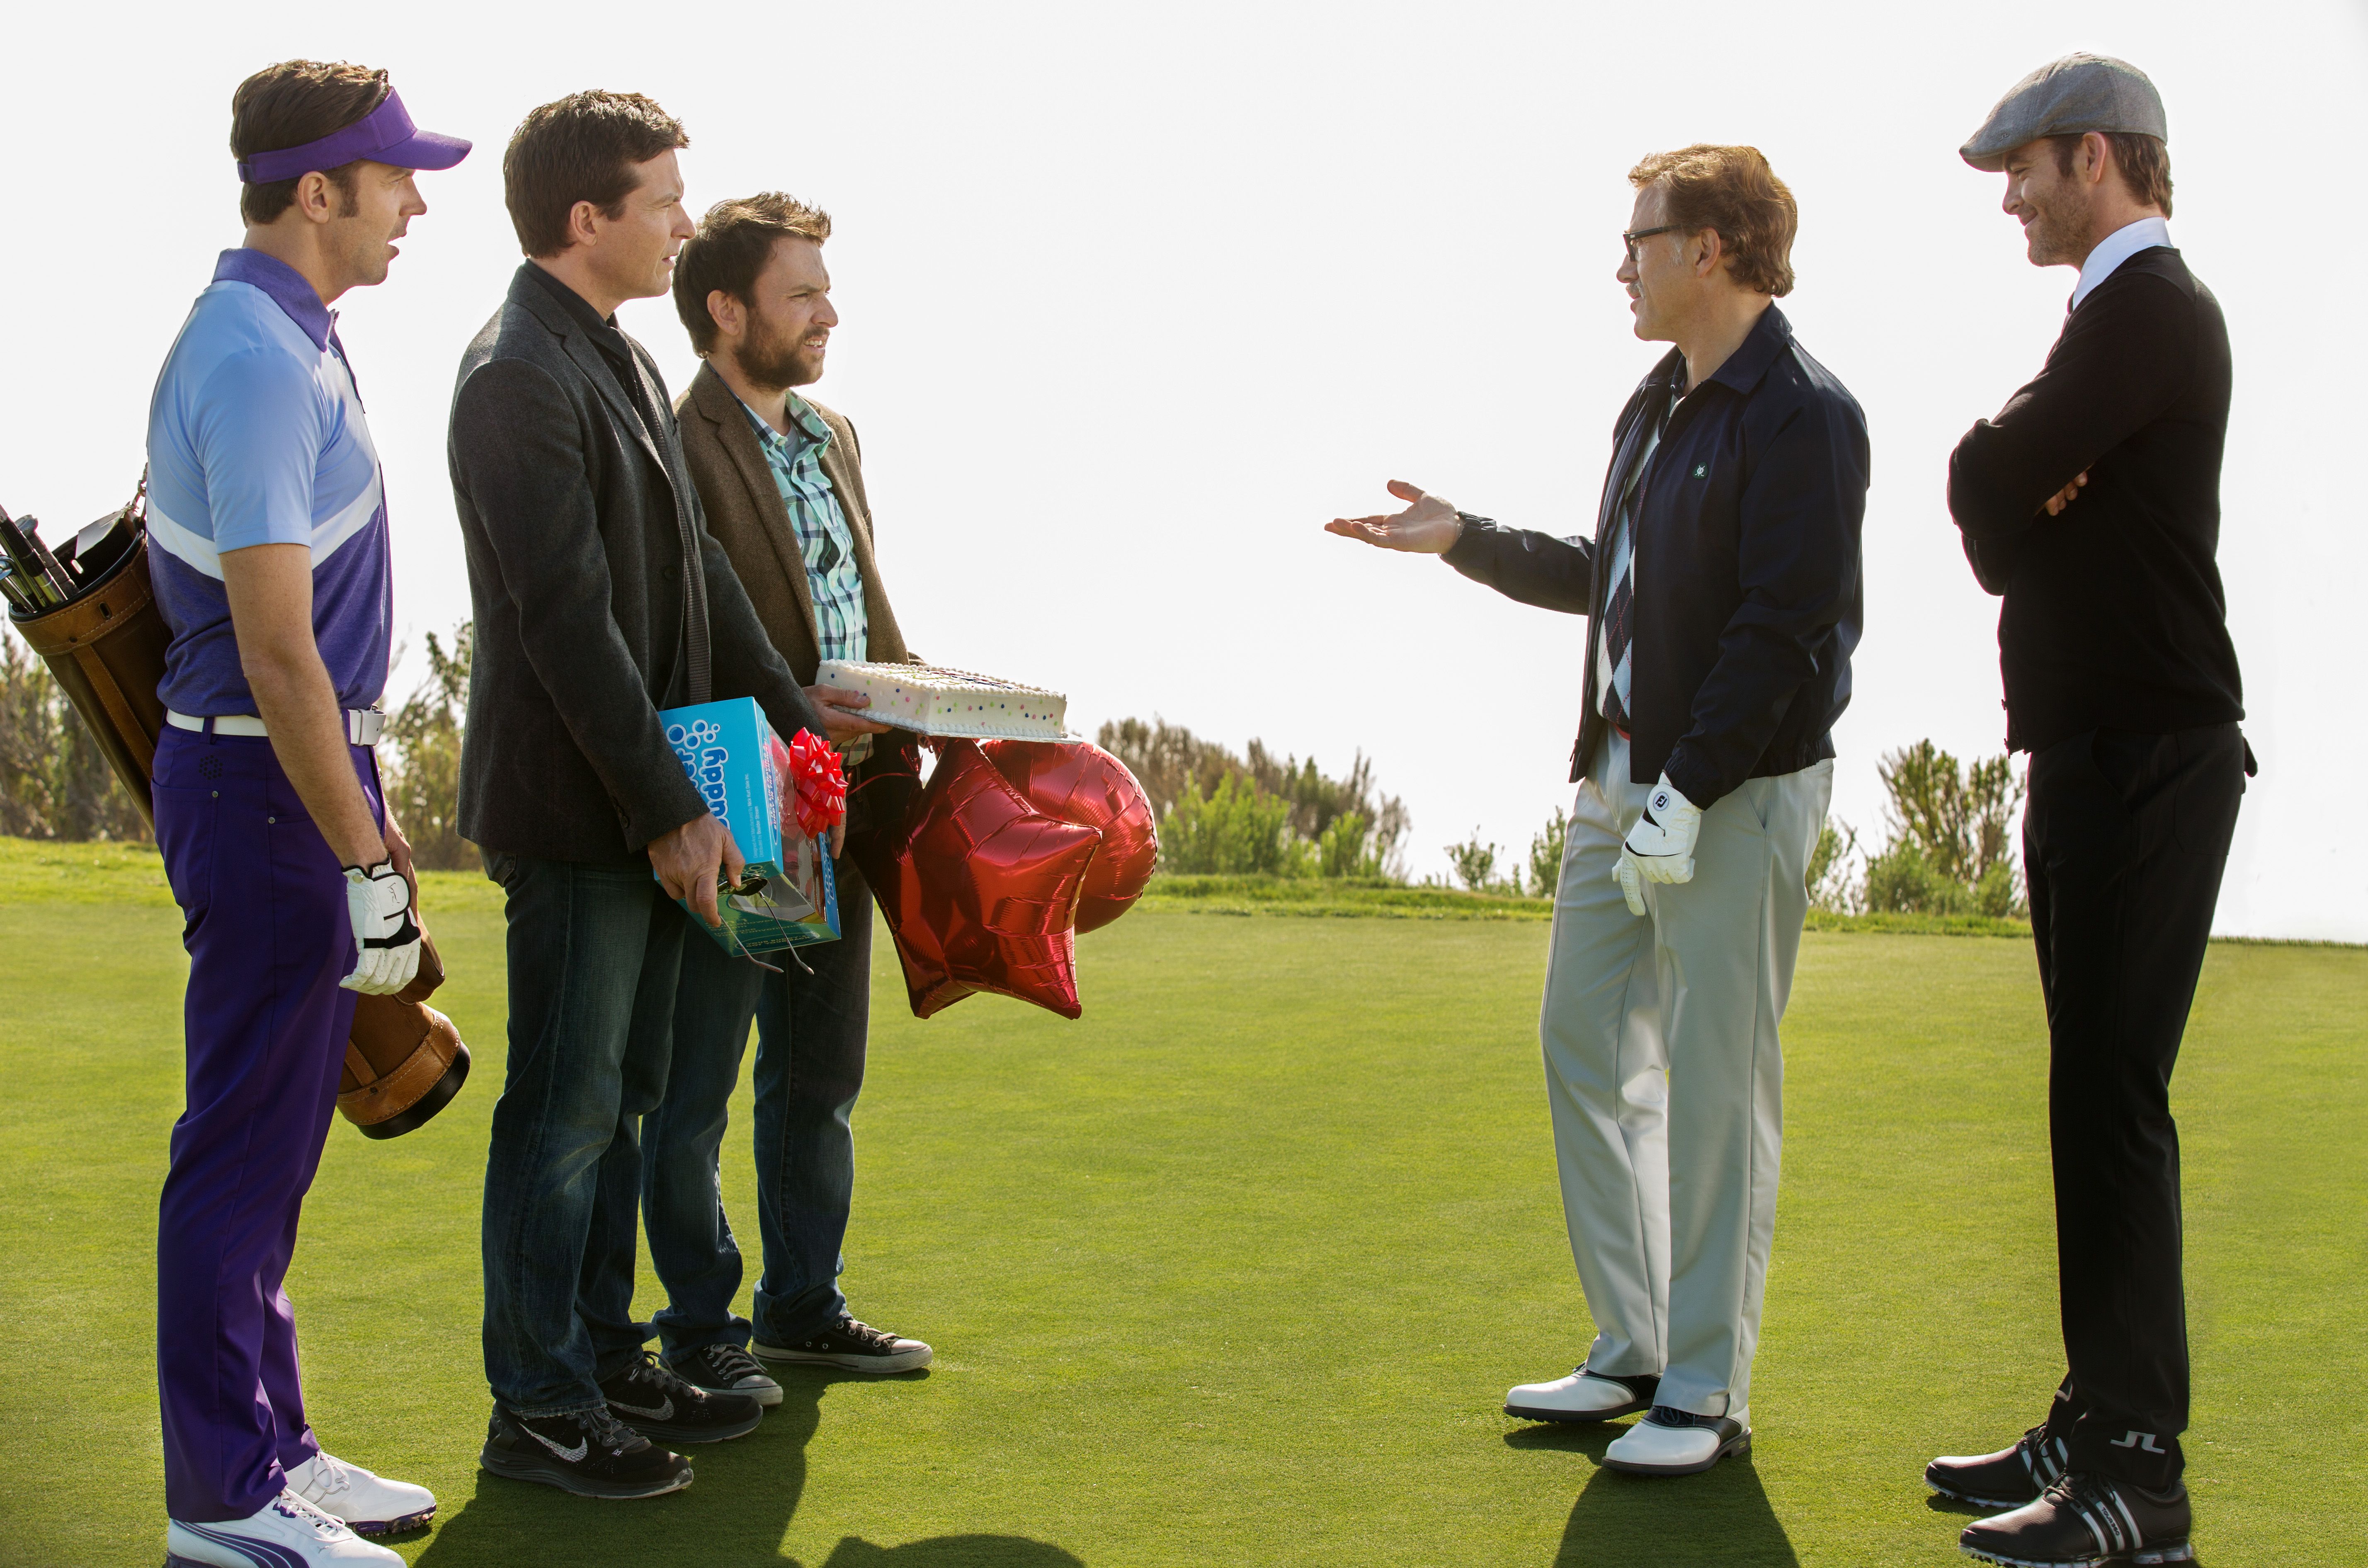 Christoph Waltz and the guys play golf in Horrible Bosses 2